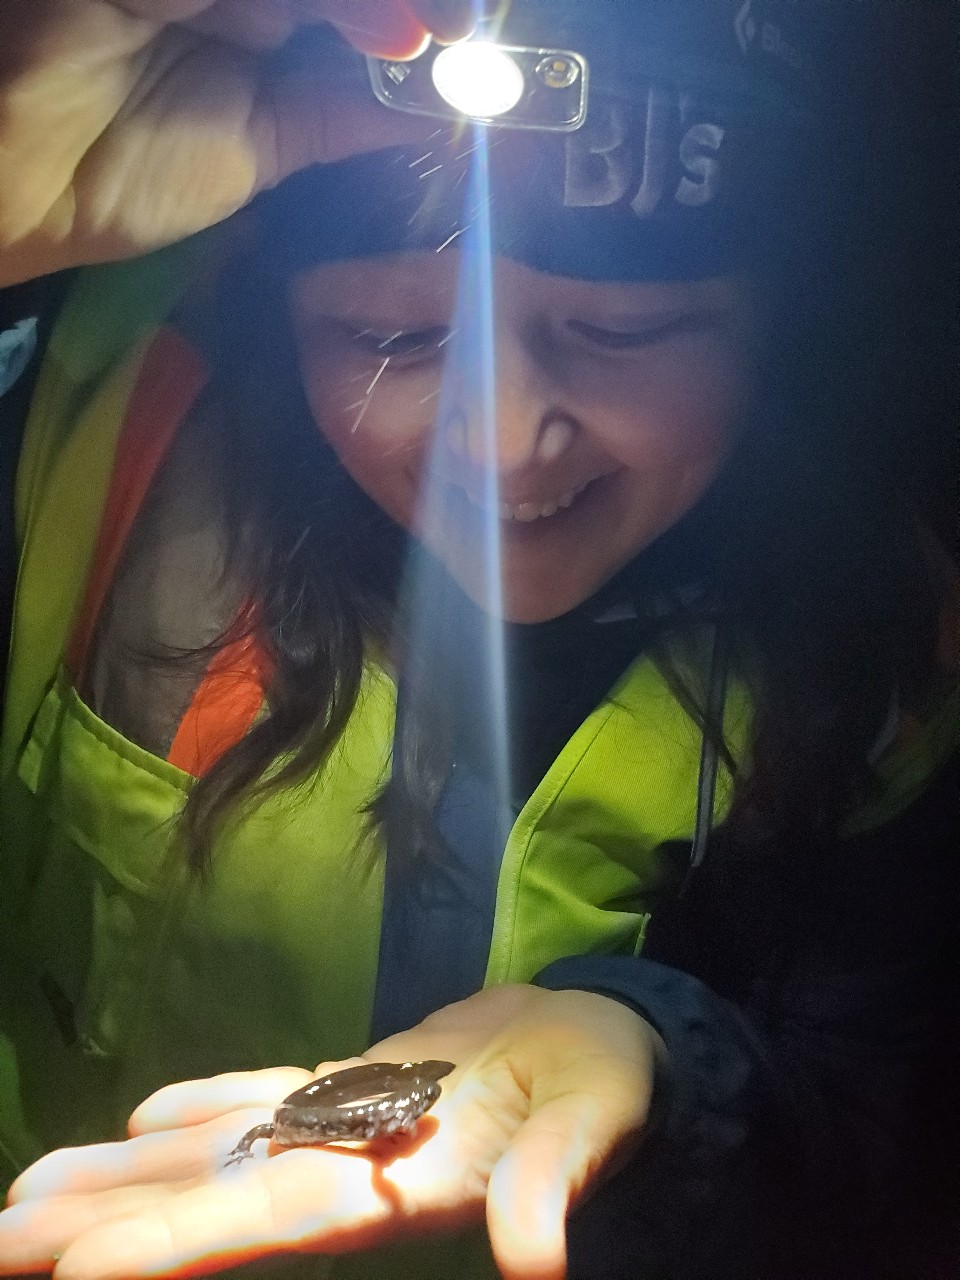 A smiling person shines a headlamp at a spotted salamander in their open hand.